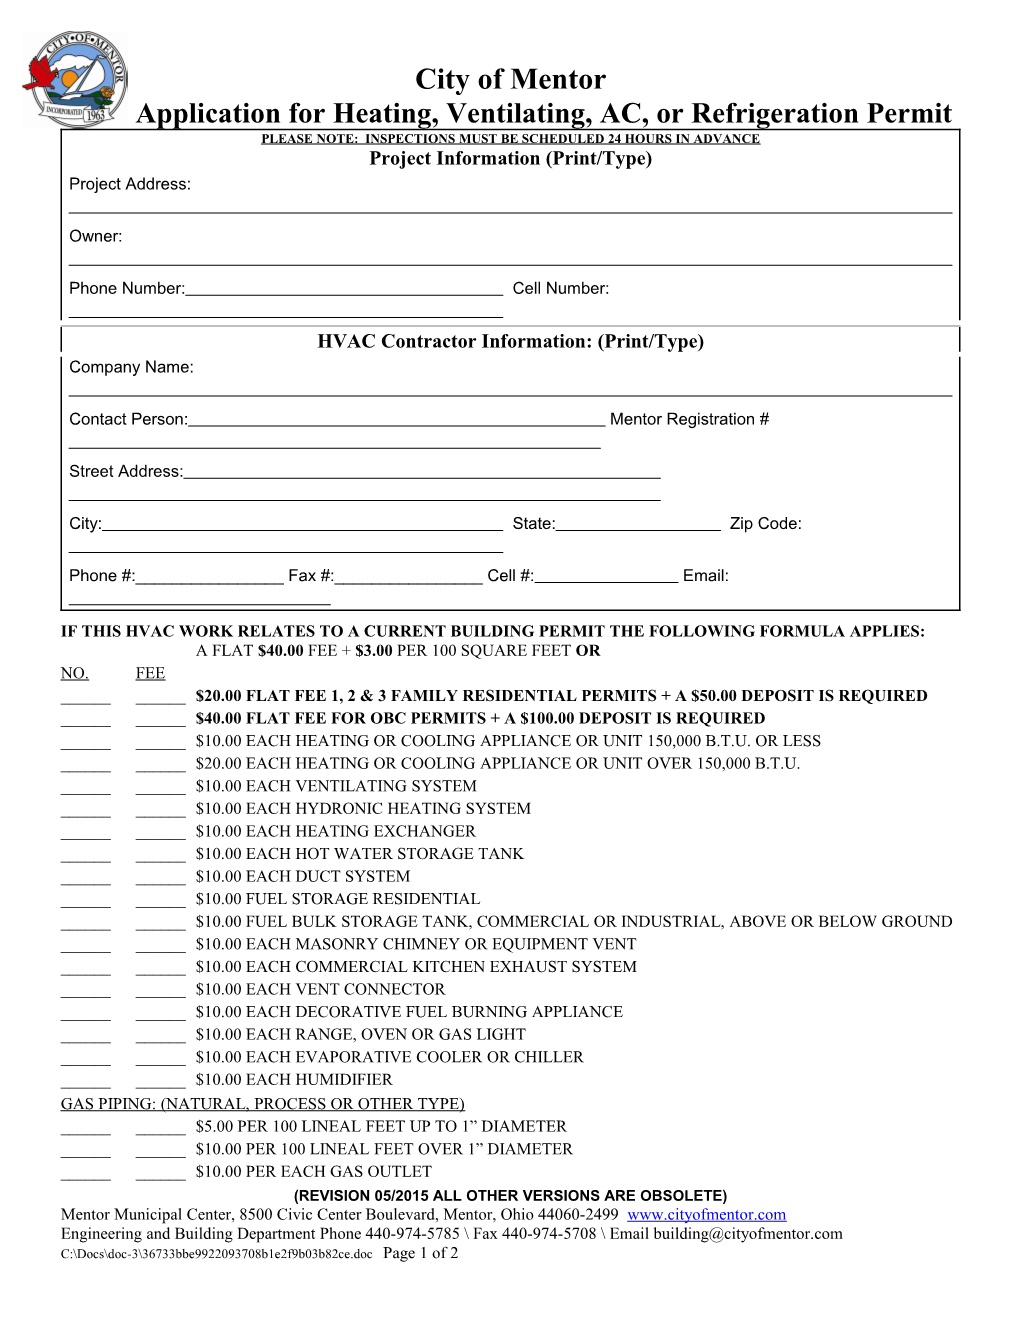 Application for Heating, Ventilating, AC, Or Refrigeration Permit